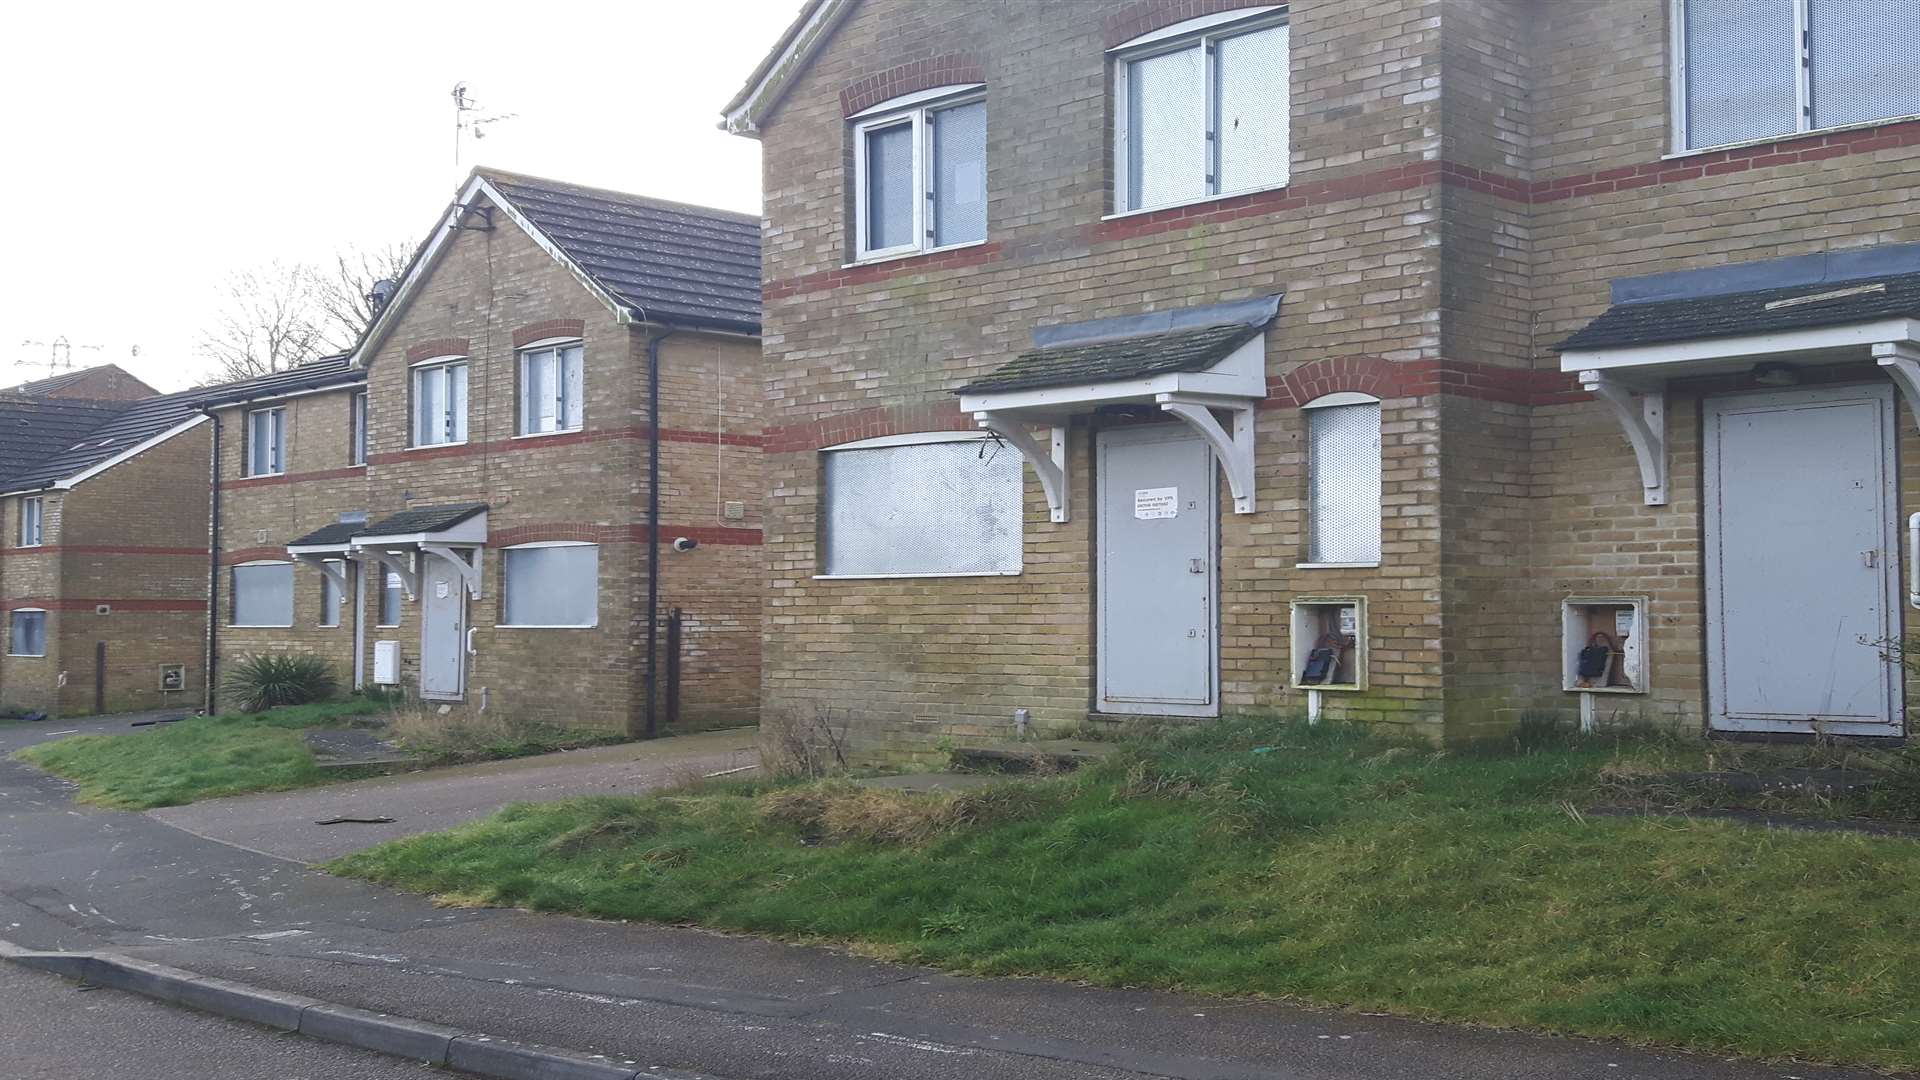 General scene of the derelict houses at Randolph Road, Dover.